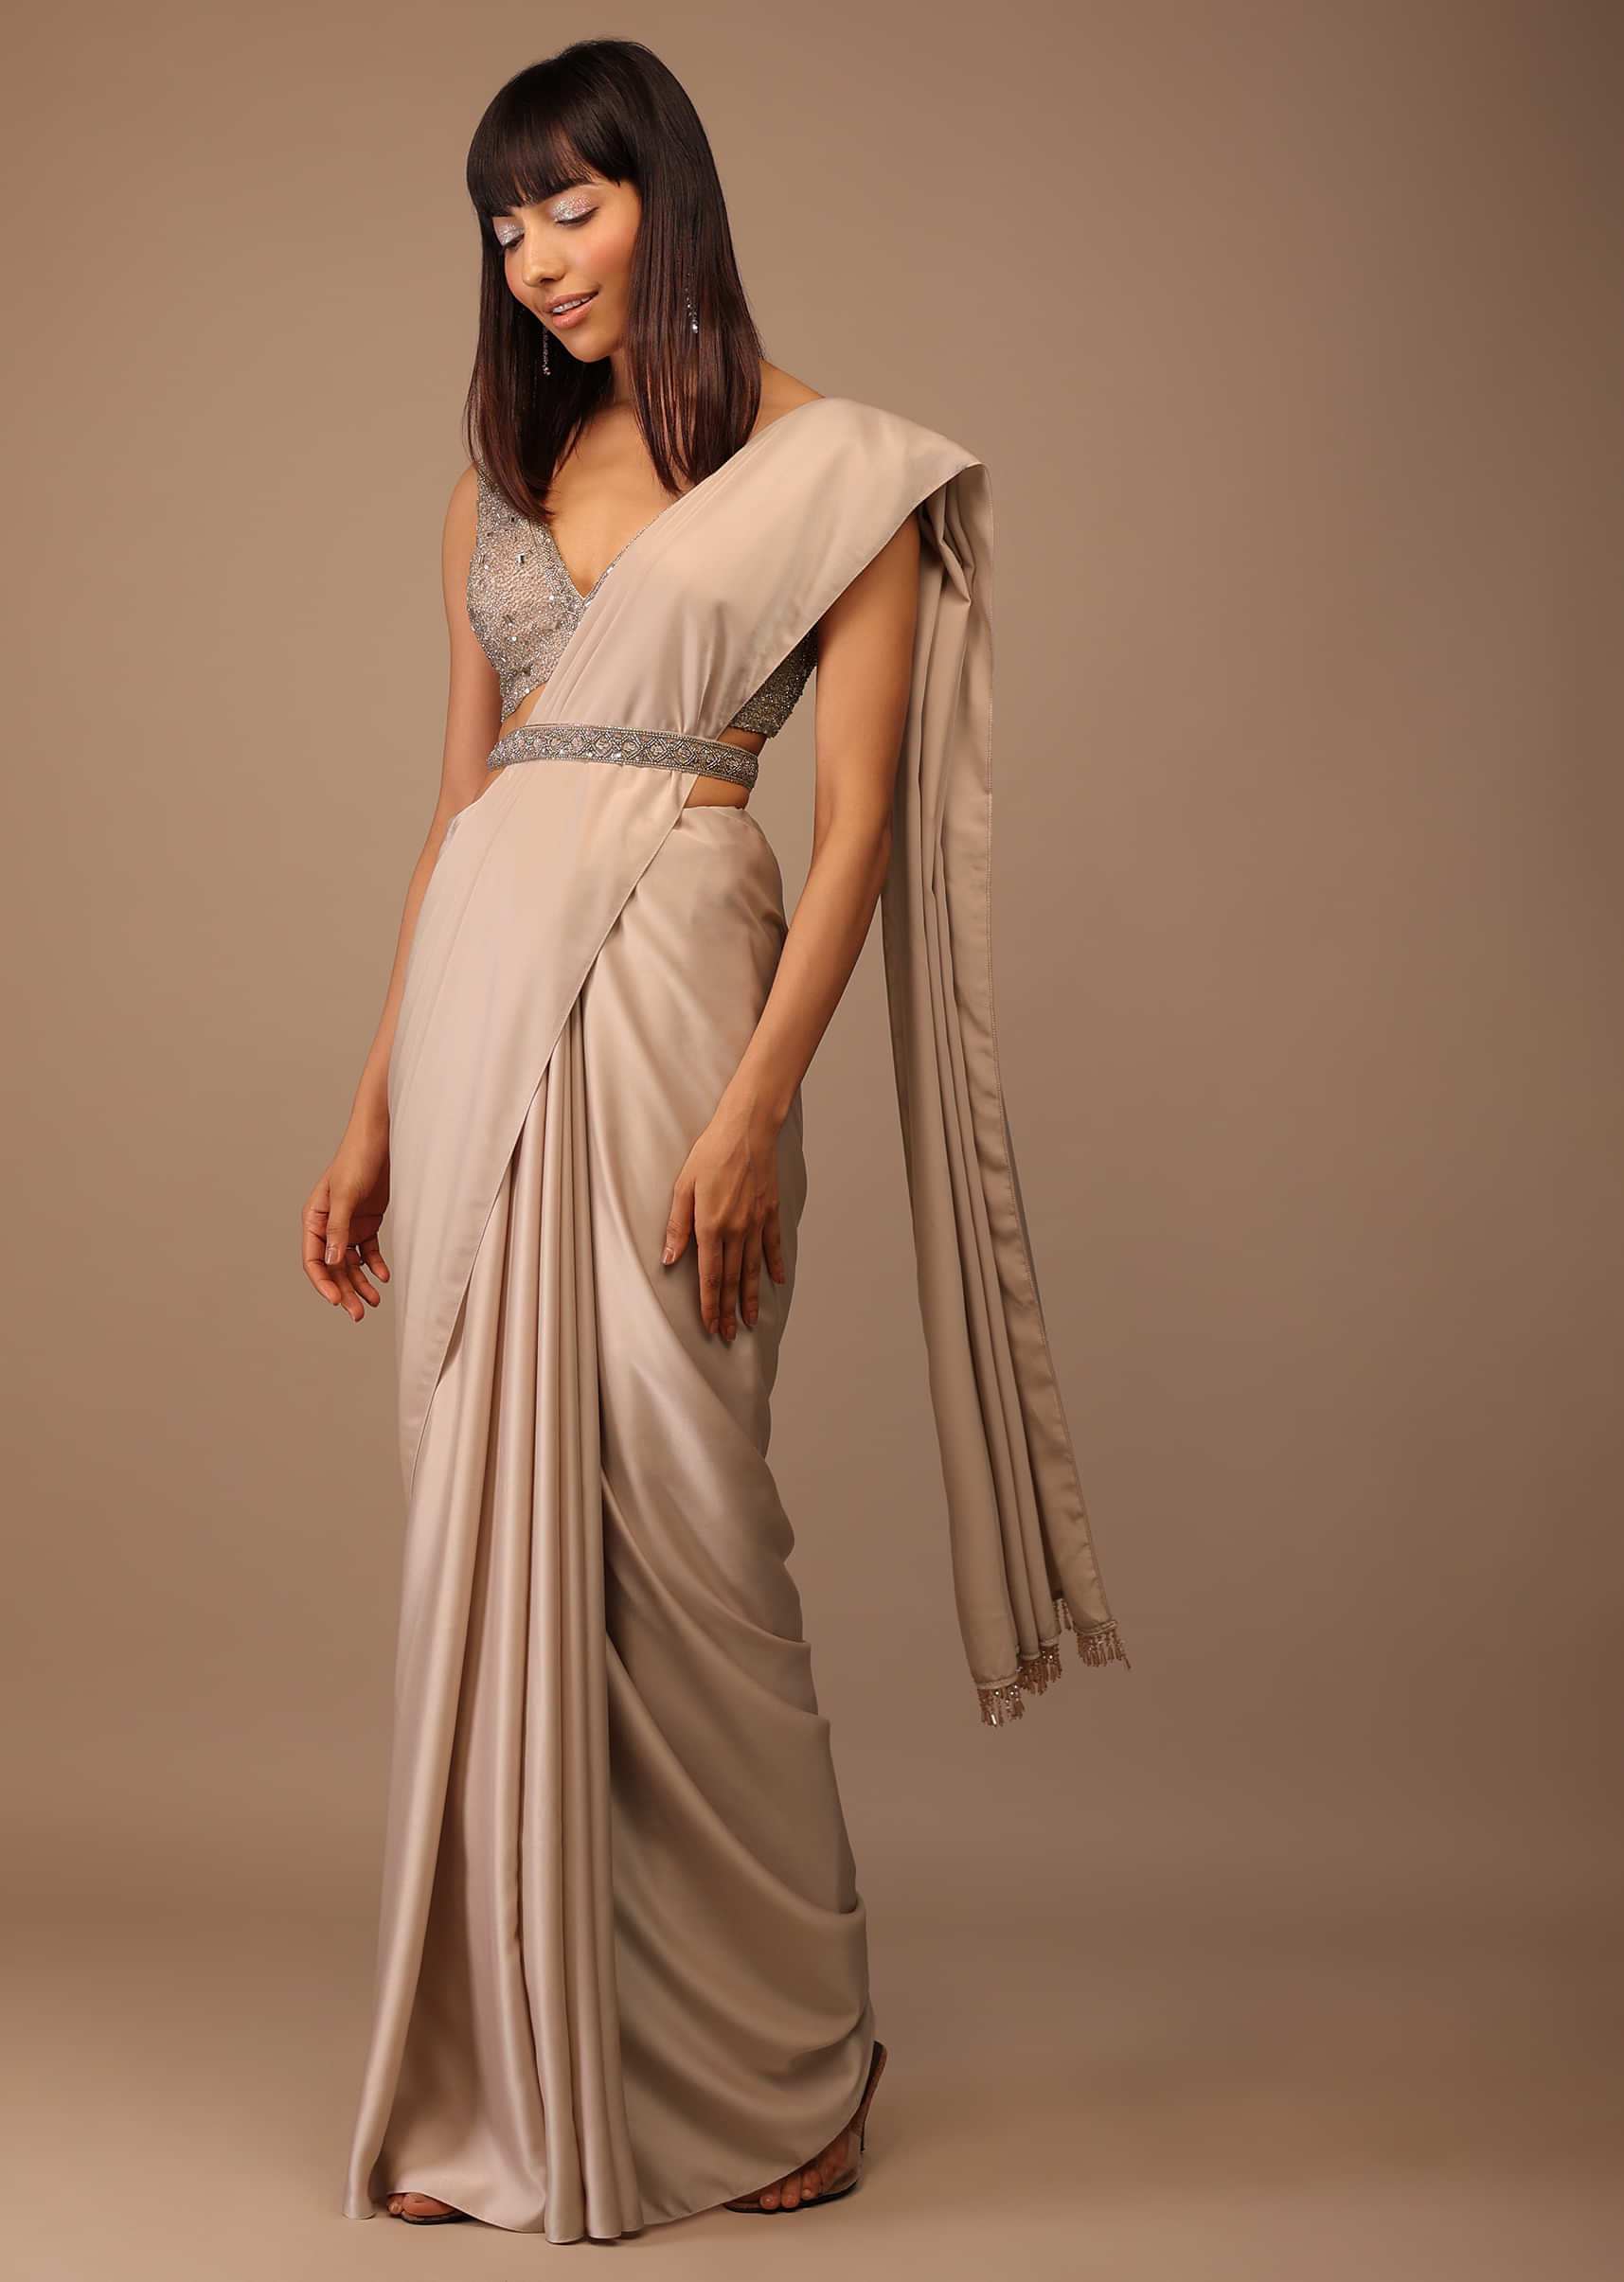 Champagne Satin Saree With Bead Fringes On Pallu Paired With Heavily Embellished  Crop Top